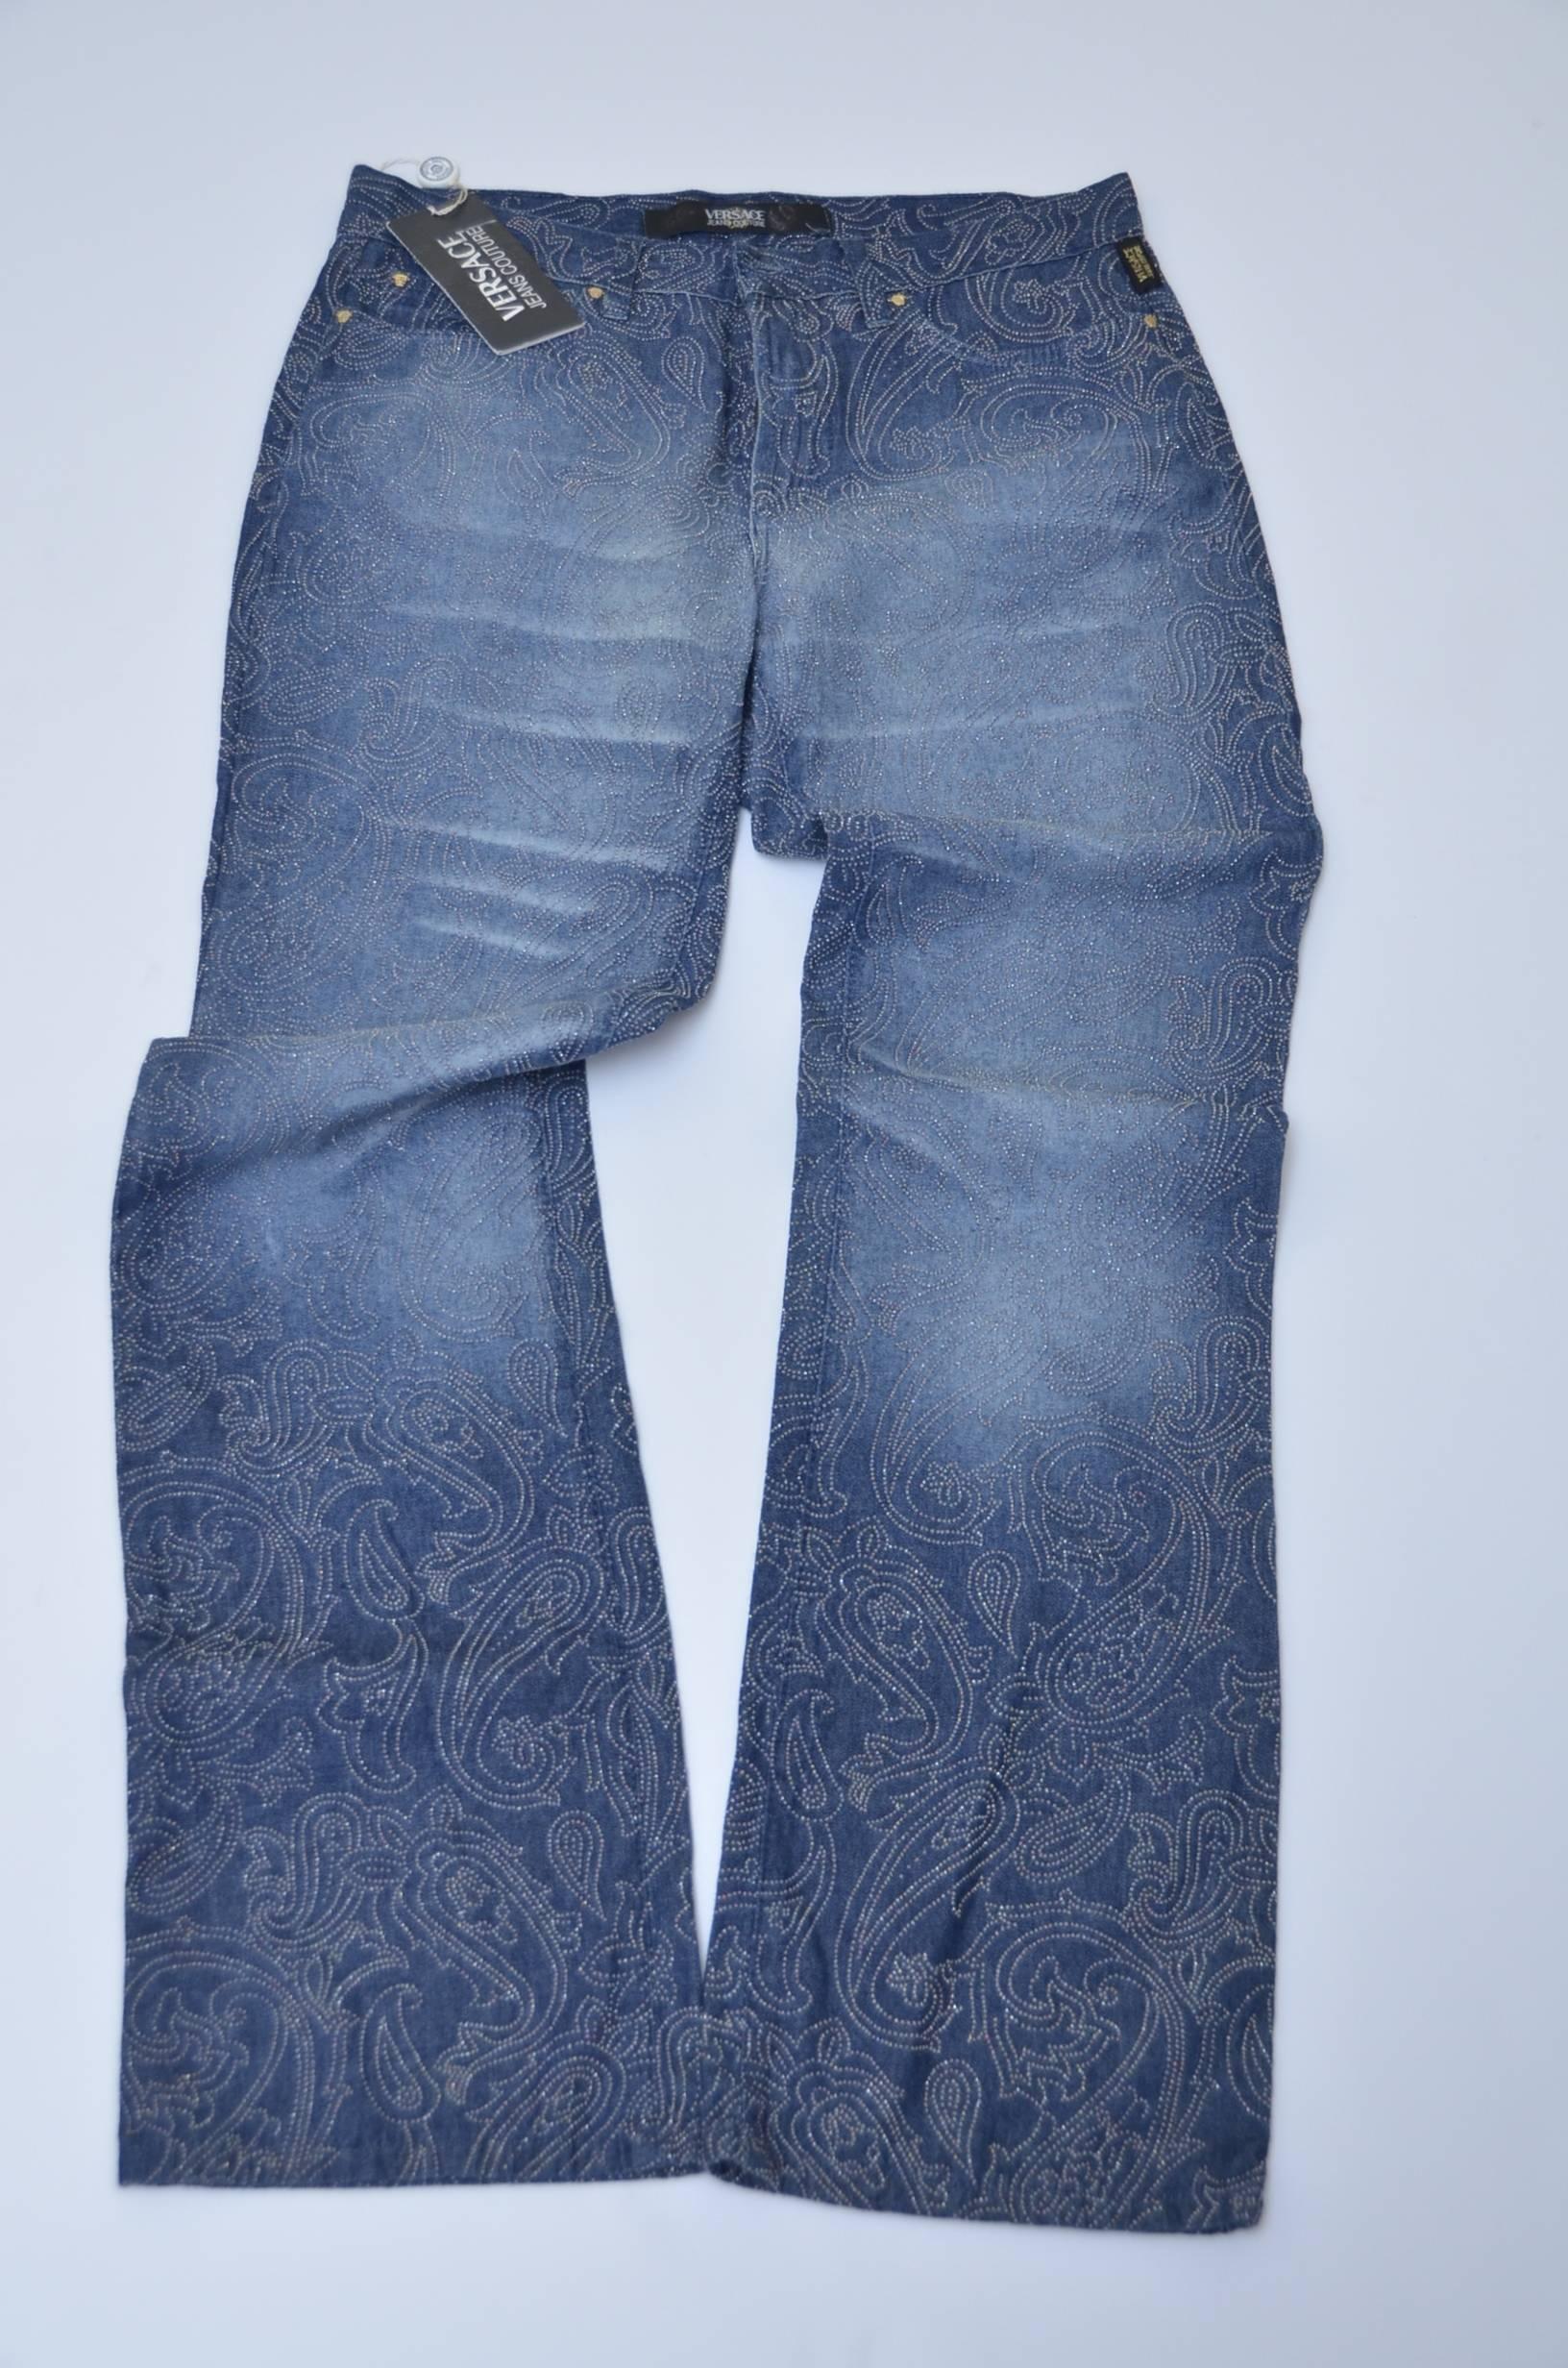 Gianni Versace With Mini Crystals/Studs   Jeans Couture Denim Jeans 31 NEW  1